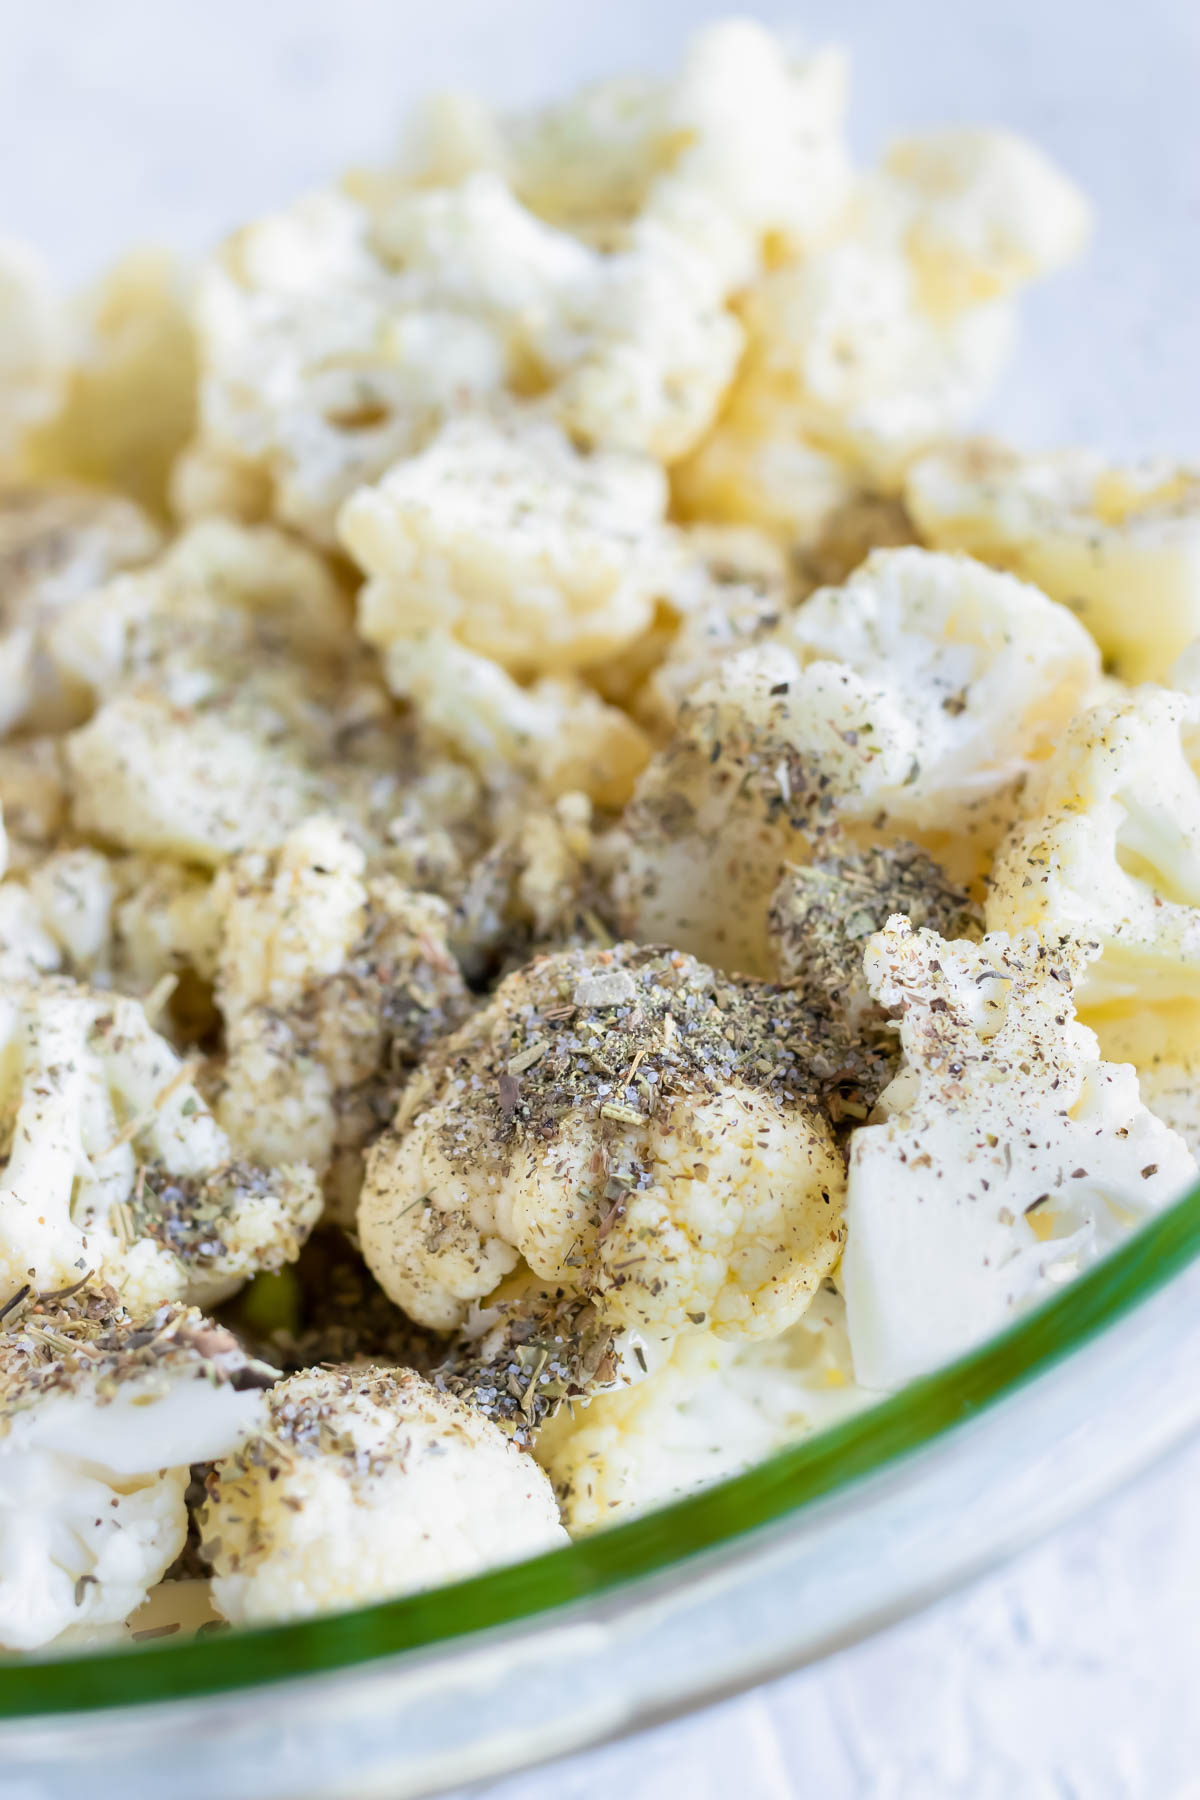 Cauliflower florets in a large bowl with Italian seasoning mix.